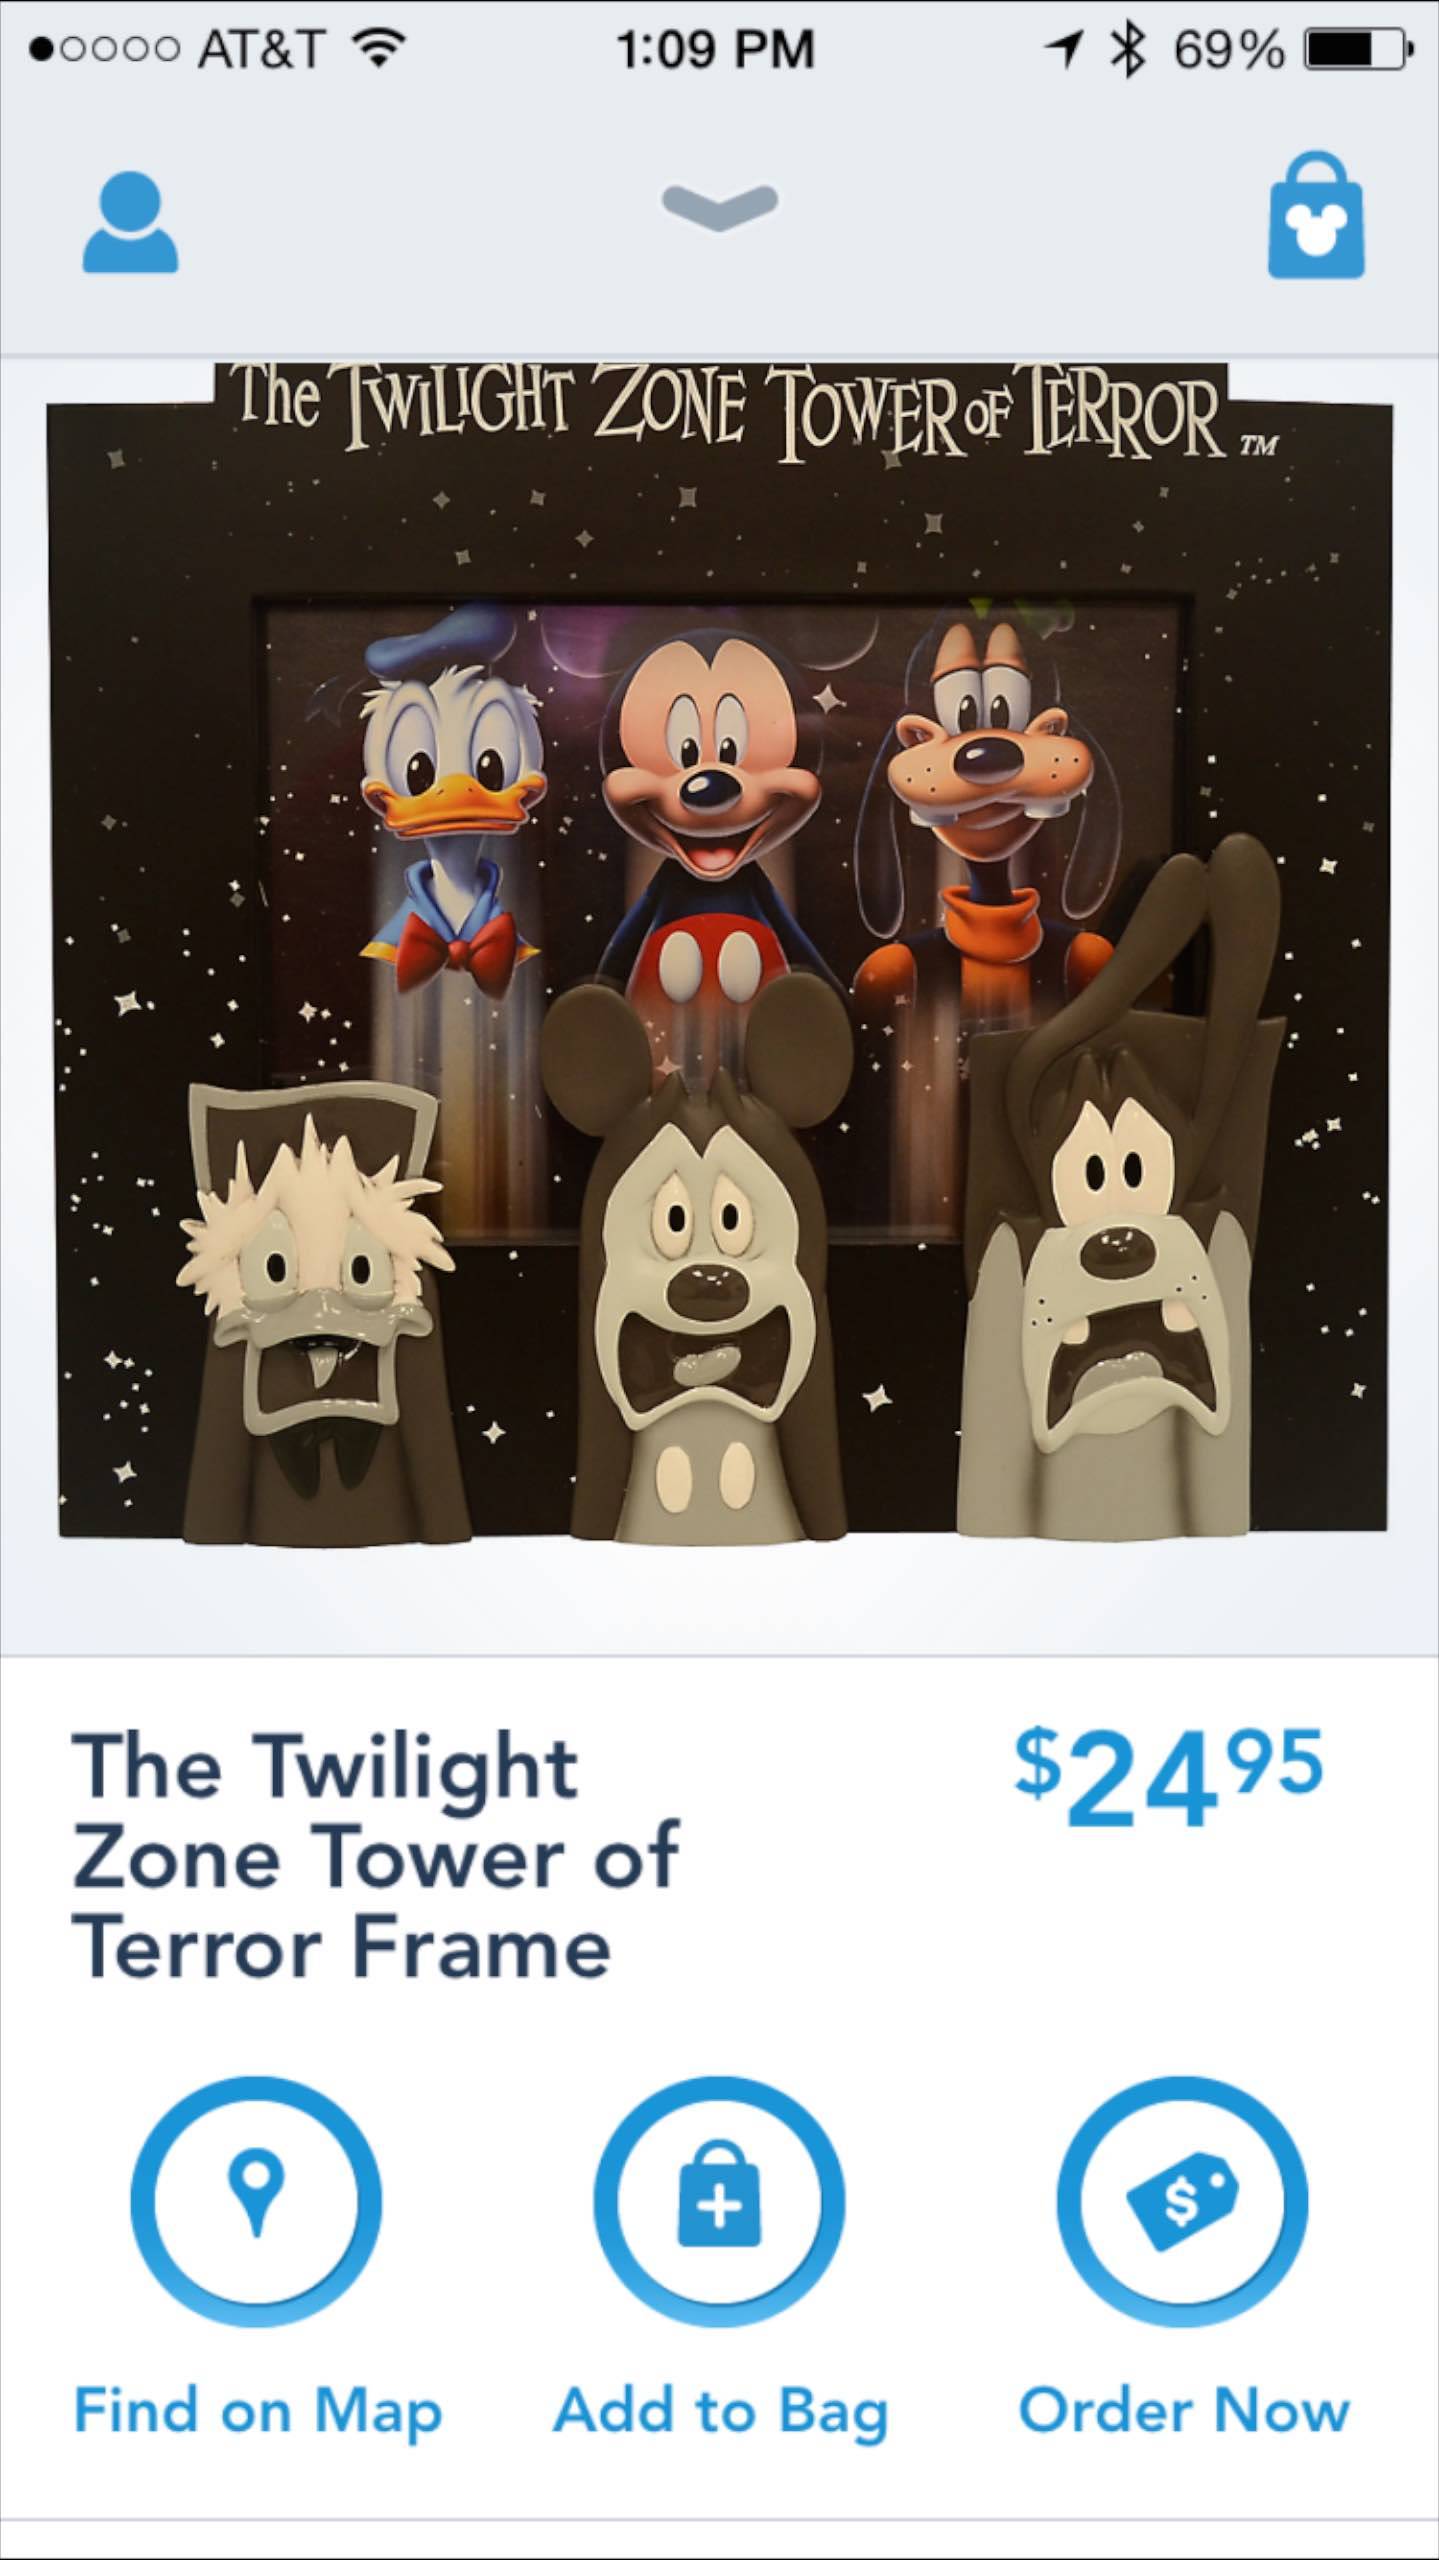 Shop Disney Parks app - Tower of Terror products